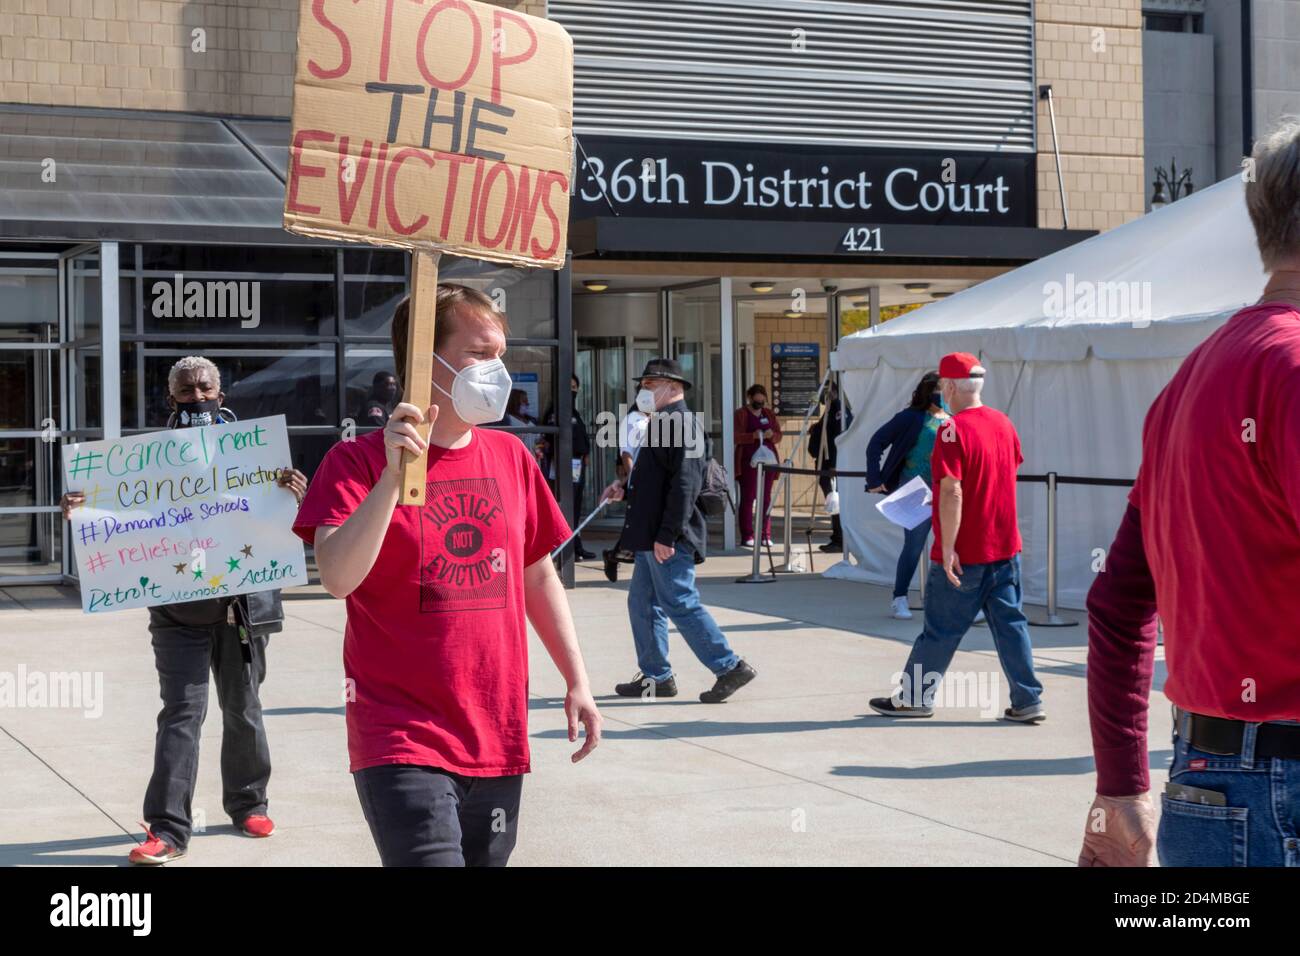 Detroit, Michigan, USA. 9th Oct, 2020. Protesters ask the chief judge of 36th District Court to halt evictions proceedings. They said that no one should be turned out of their home during the coronavirus public health crisis. Credit: Jim West/Alamy Live News Stock Photo